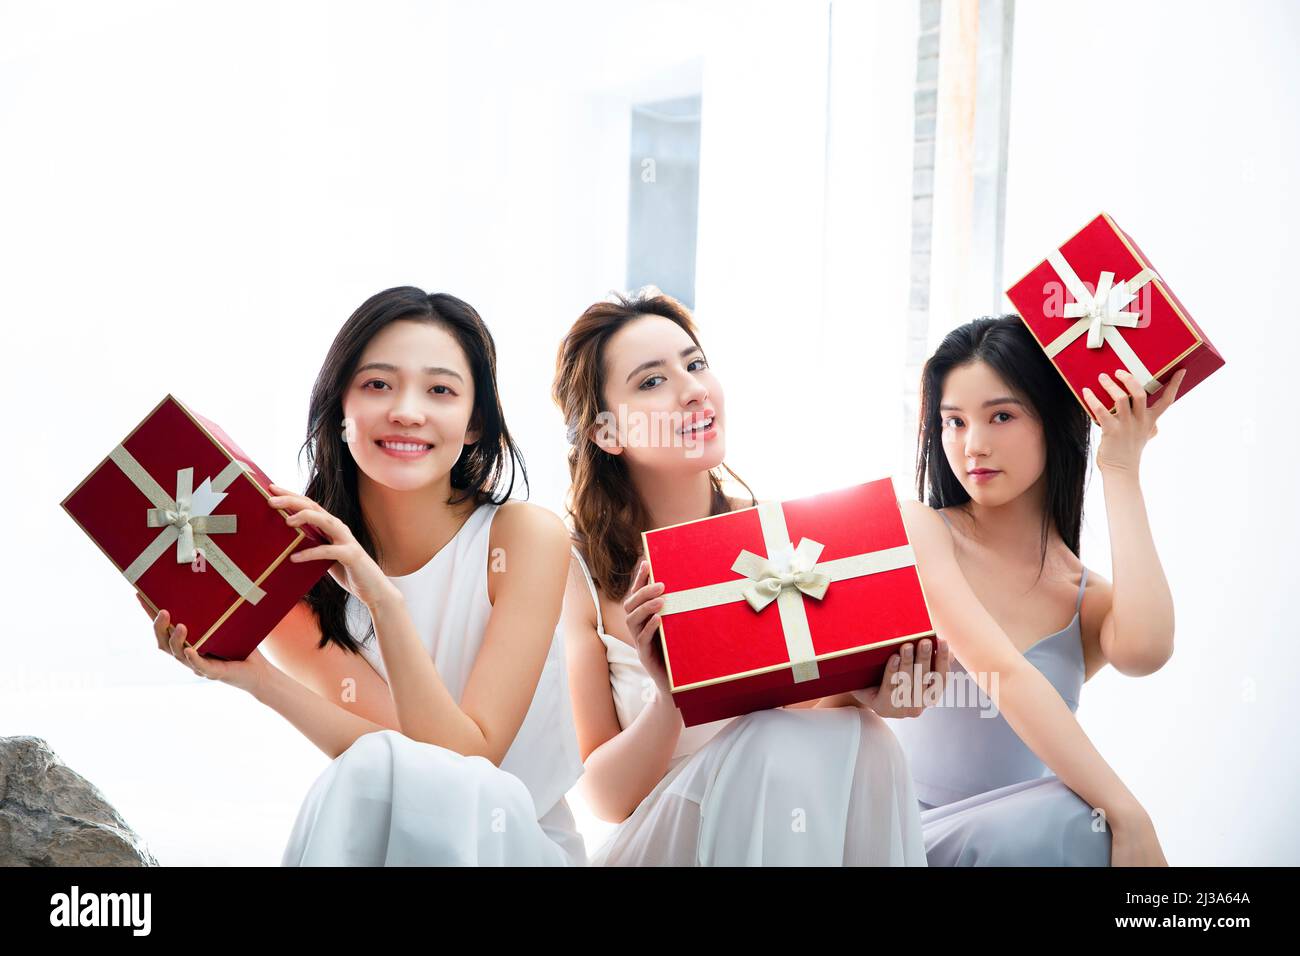 Fashionably dressed young women displaying red holiday gift boxes  - stock photo Stock Photo